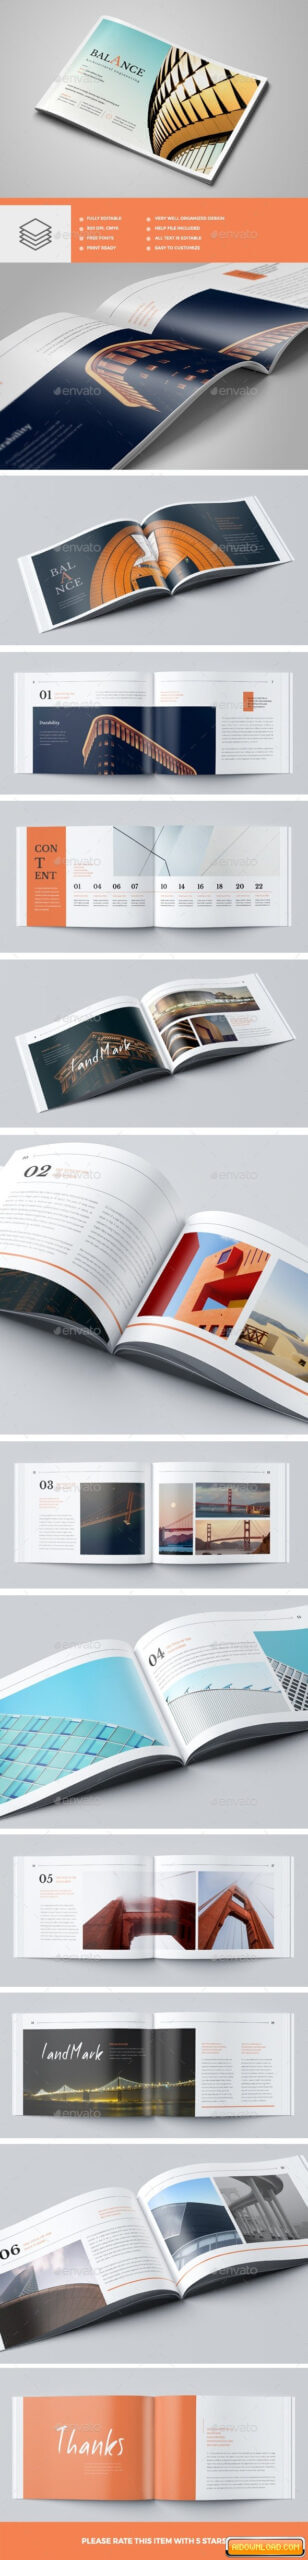 Architecture Brochure Templates Free Download - Calep For Architecture Brochure Templates Free Download